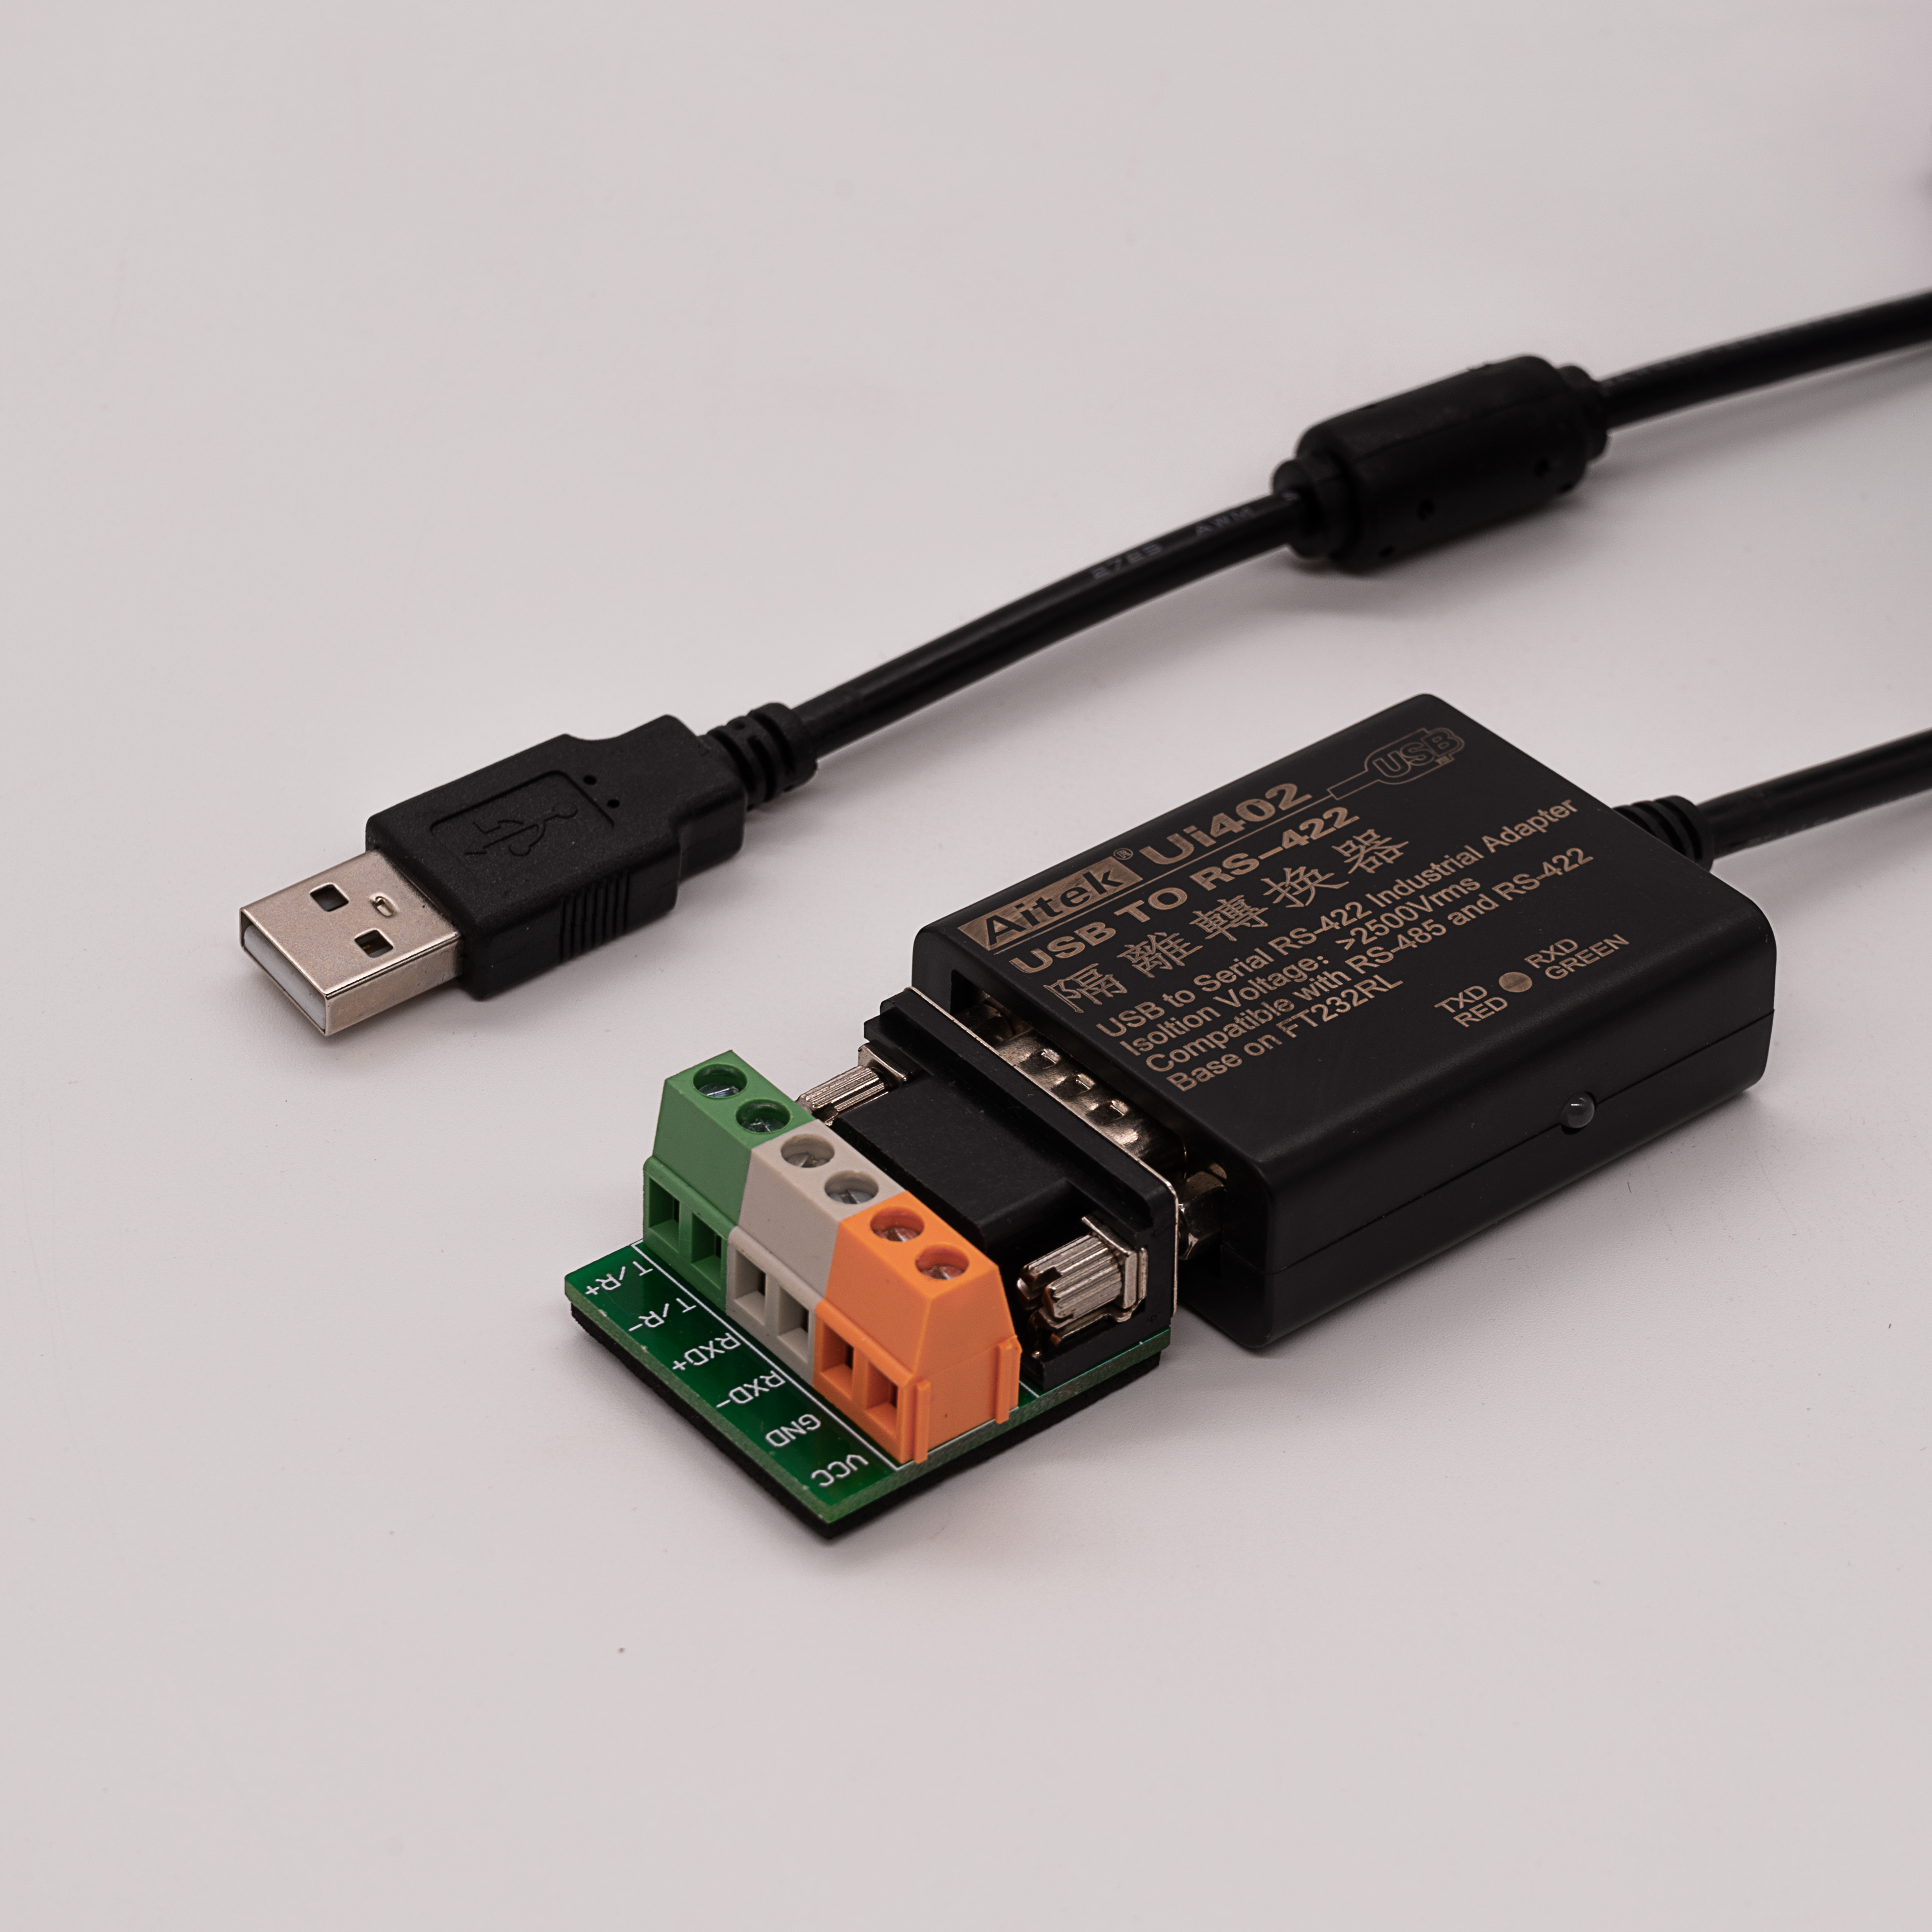 Ui402 USB to RS422 adapter 1.5m